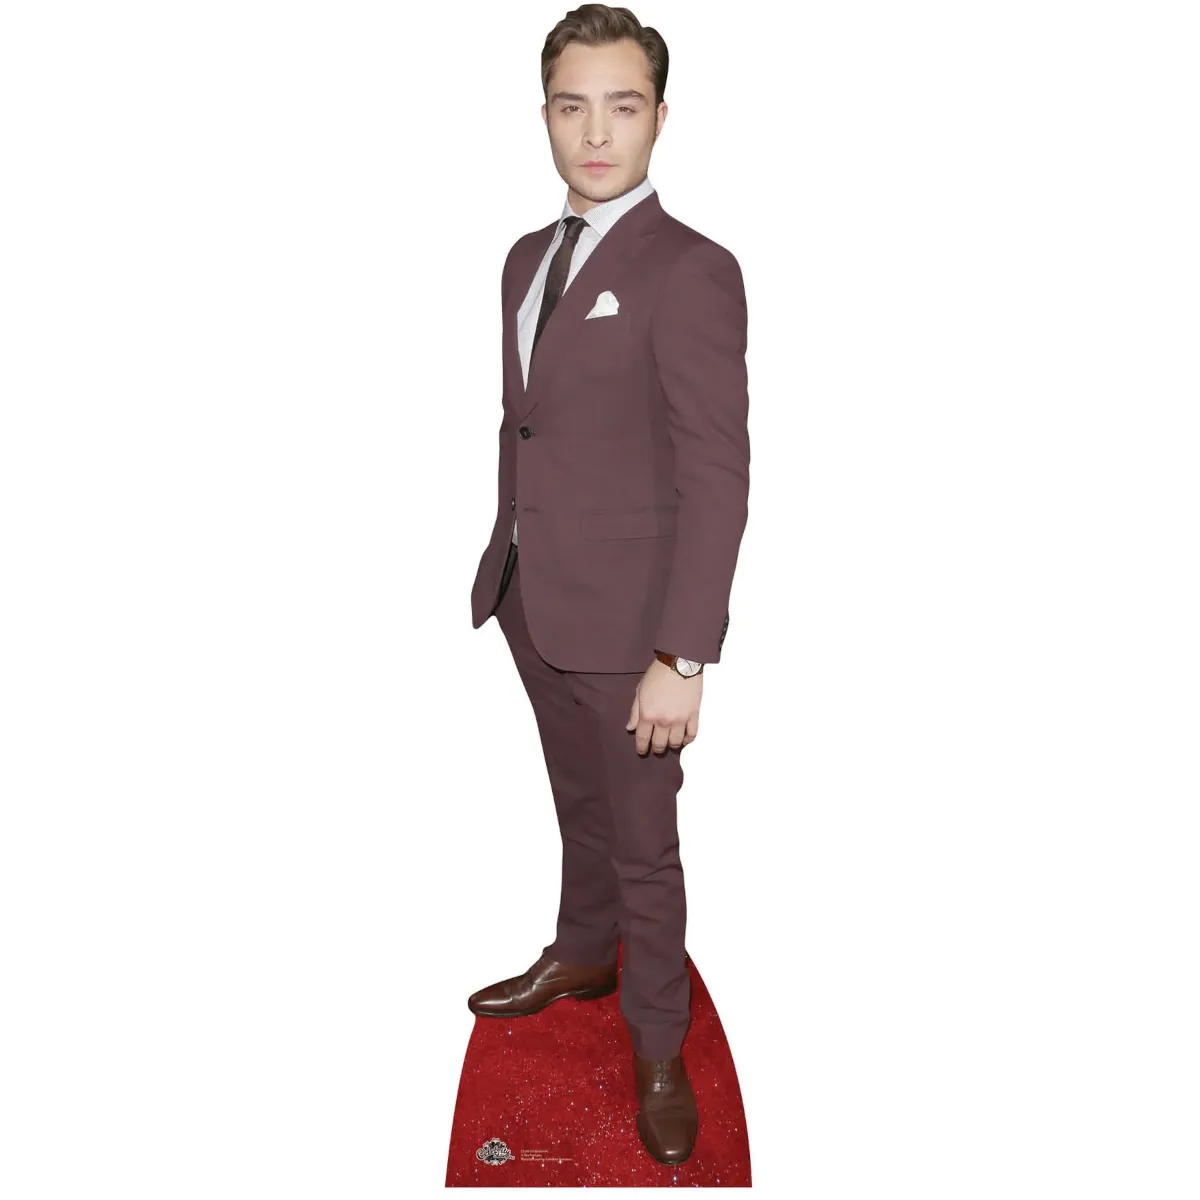 CS596 Ed Westwick 'Red Carpet' (English Actor) Lifesize Cardboard Cutout Standee Front